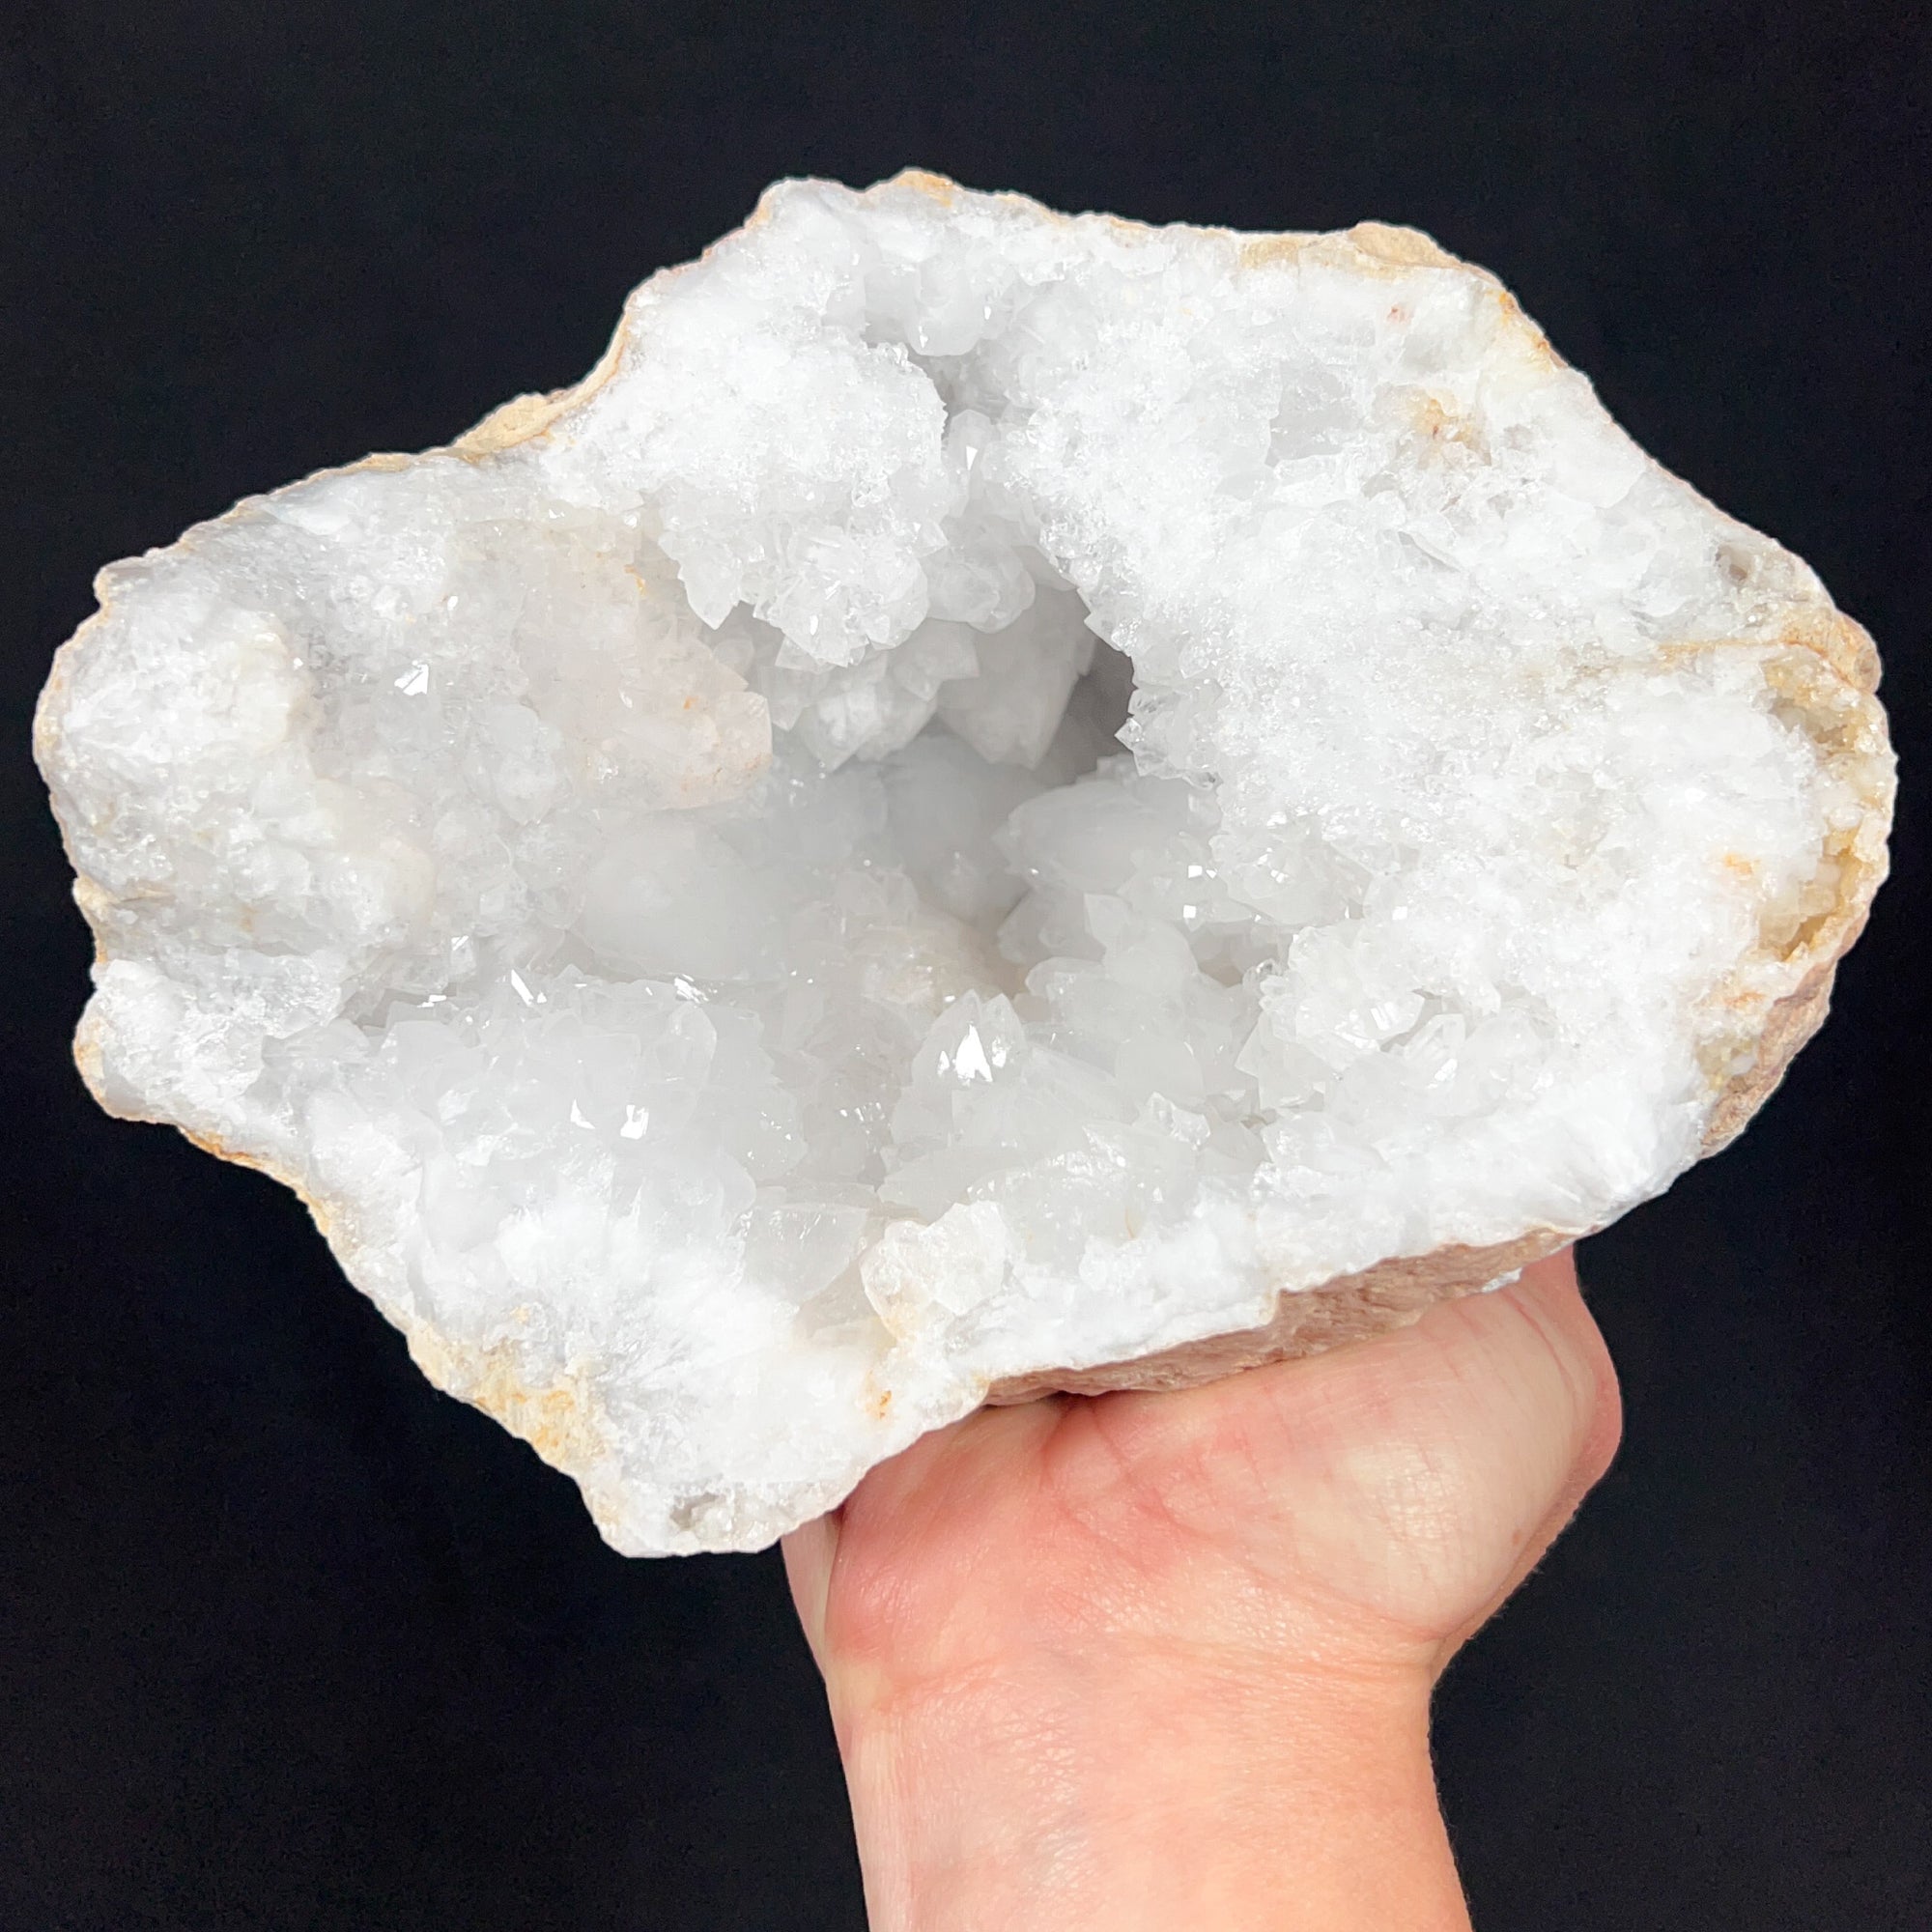 Extra Large Natural Quartz Geode with White Crystals